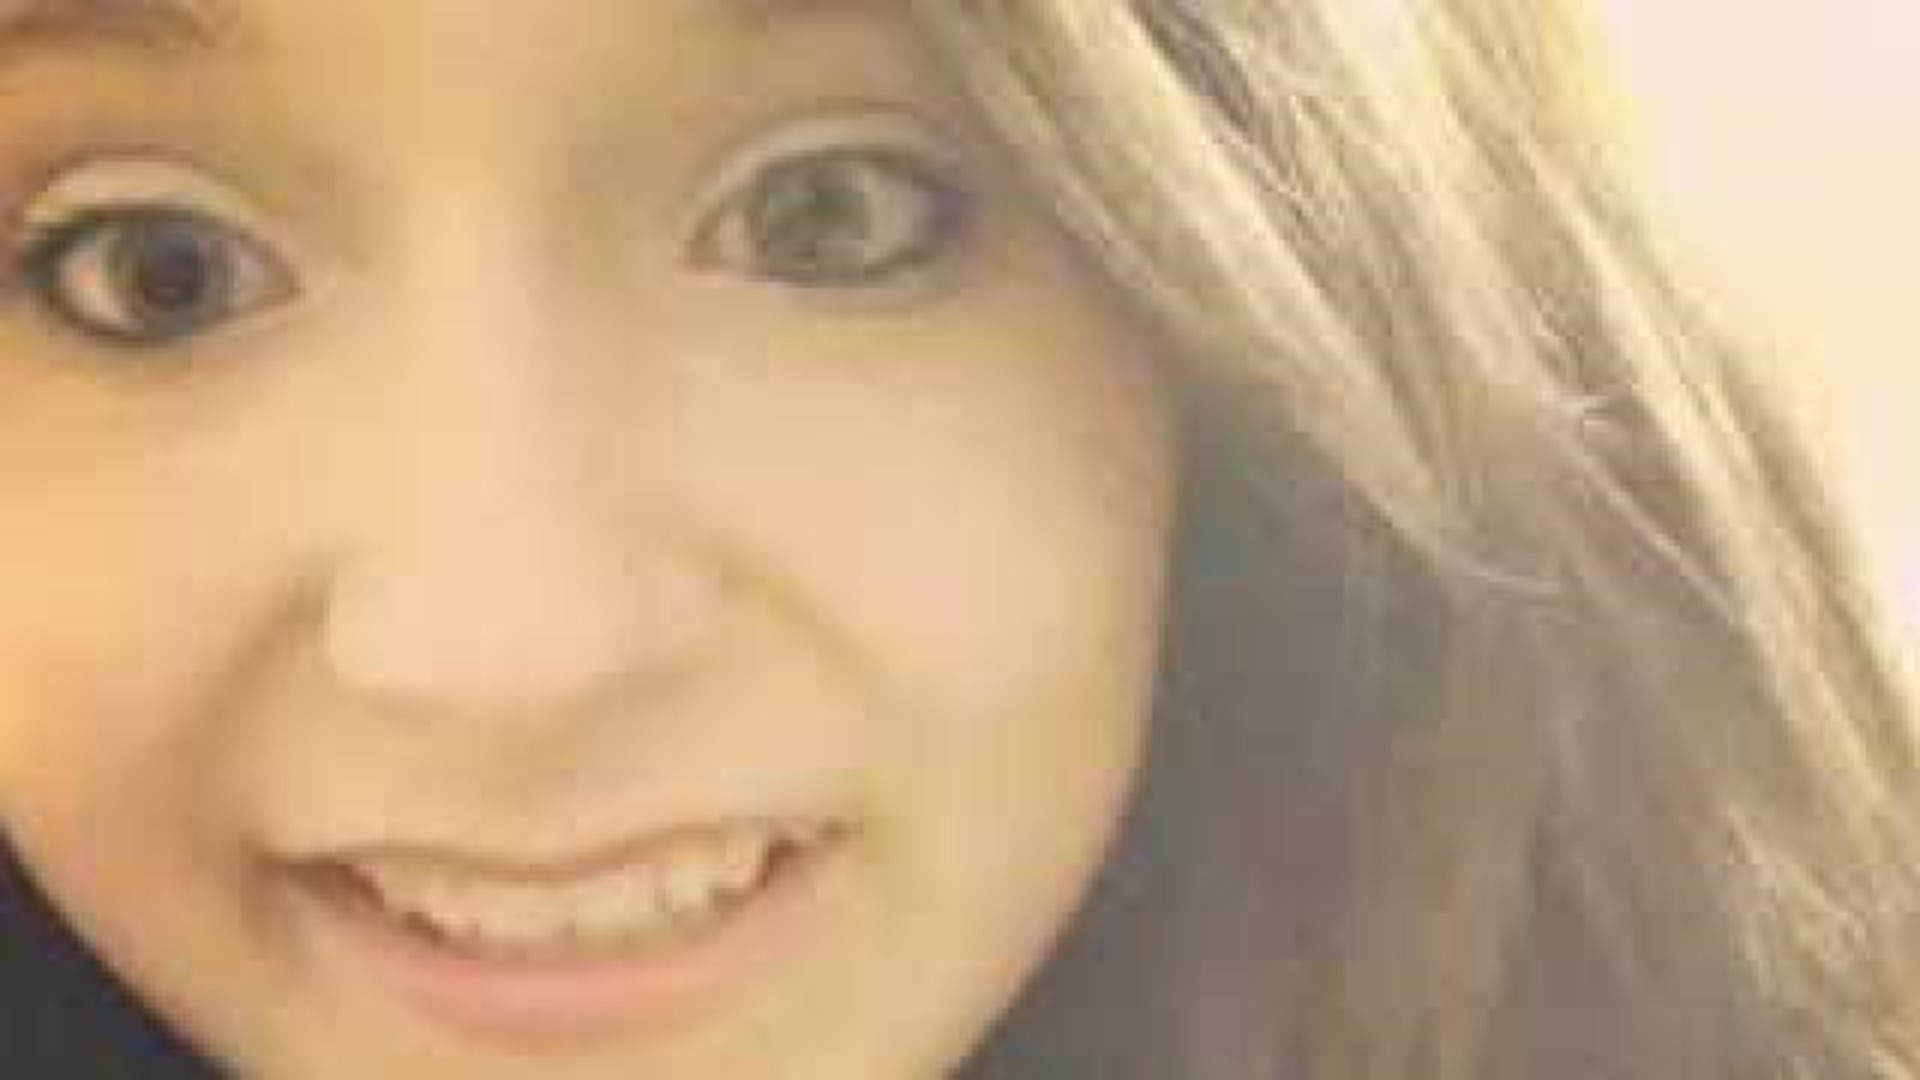 Friends Say 14 Year Old Killed Herself Over Bullying 